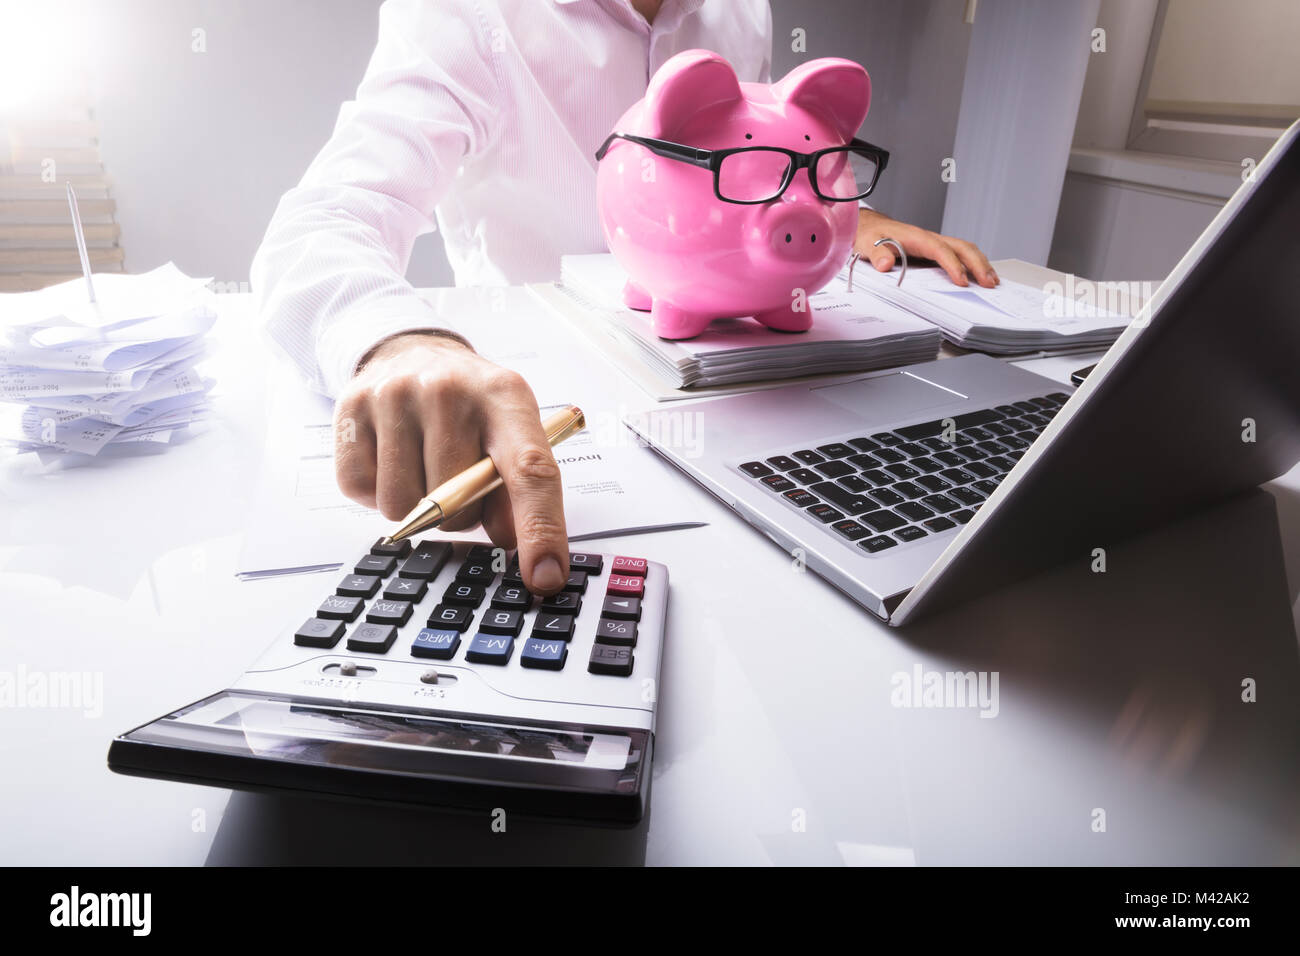 Midsection Of Businessman Calculating Tax Using Calculator With Piggybank And Laptop On Desk In Office Stock Photo